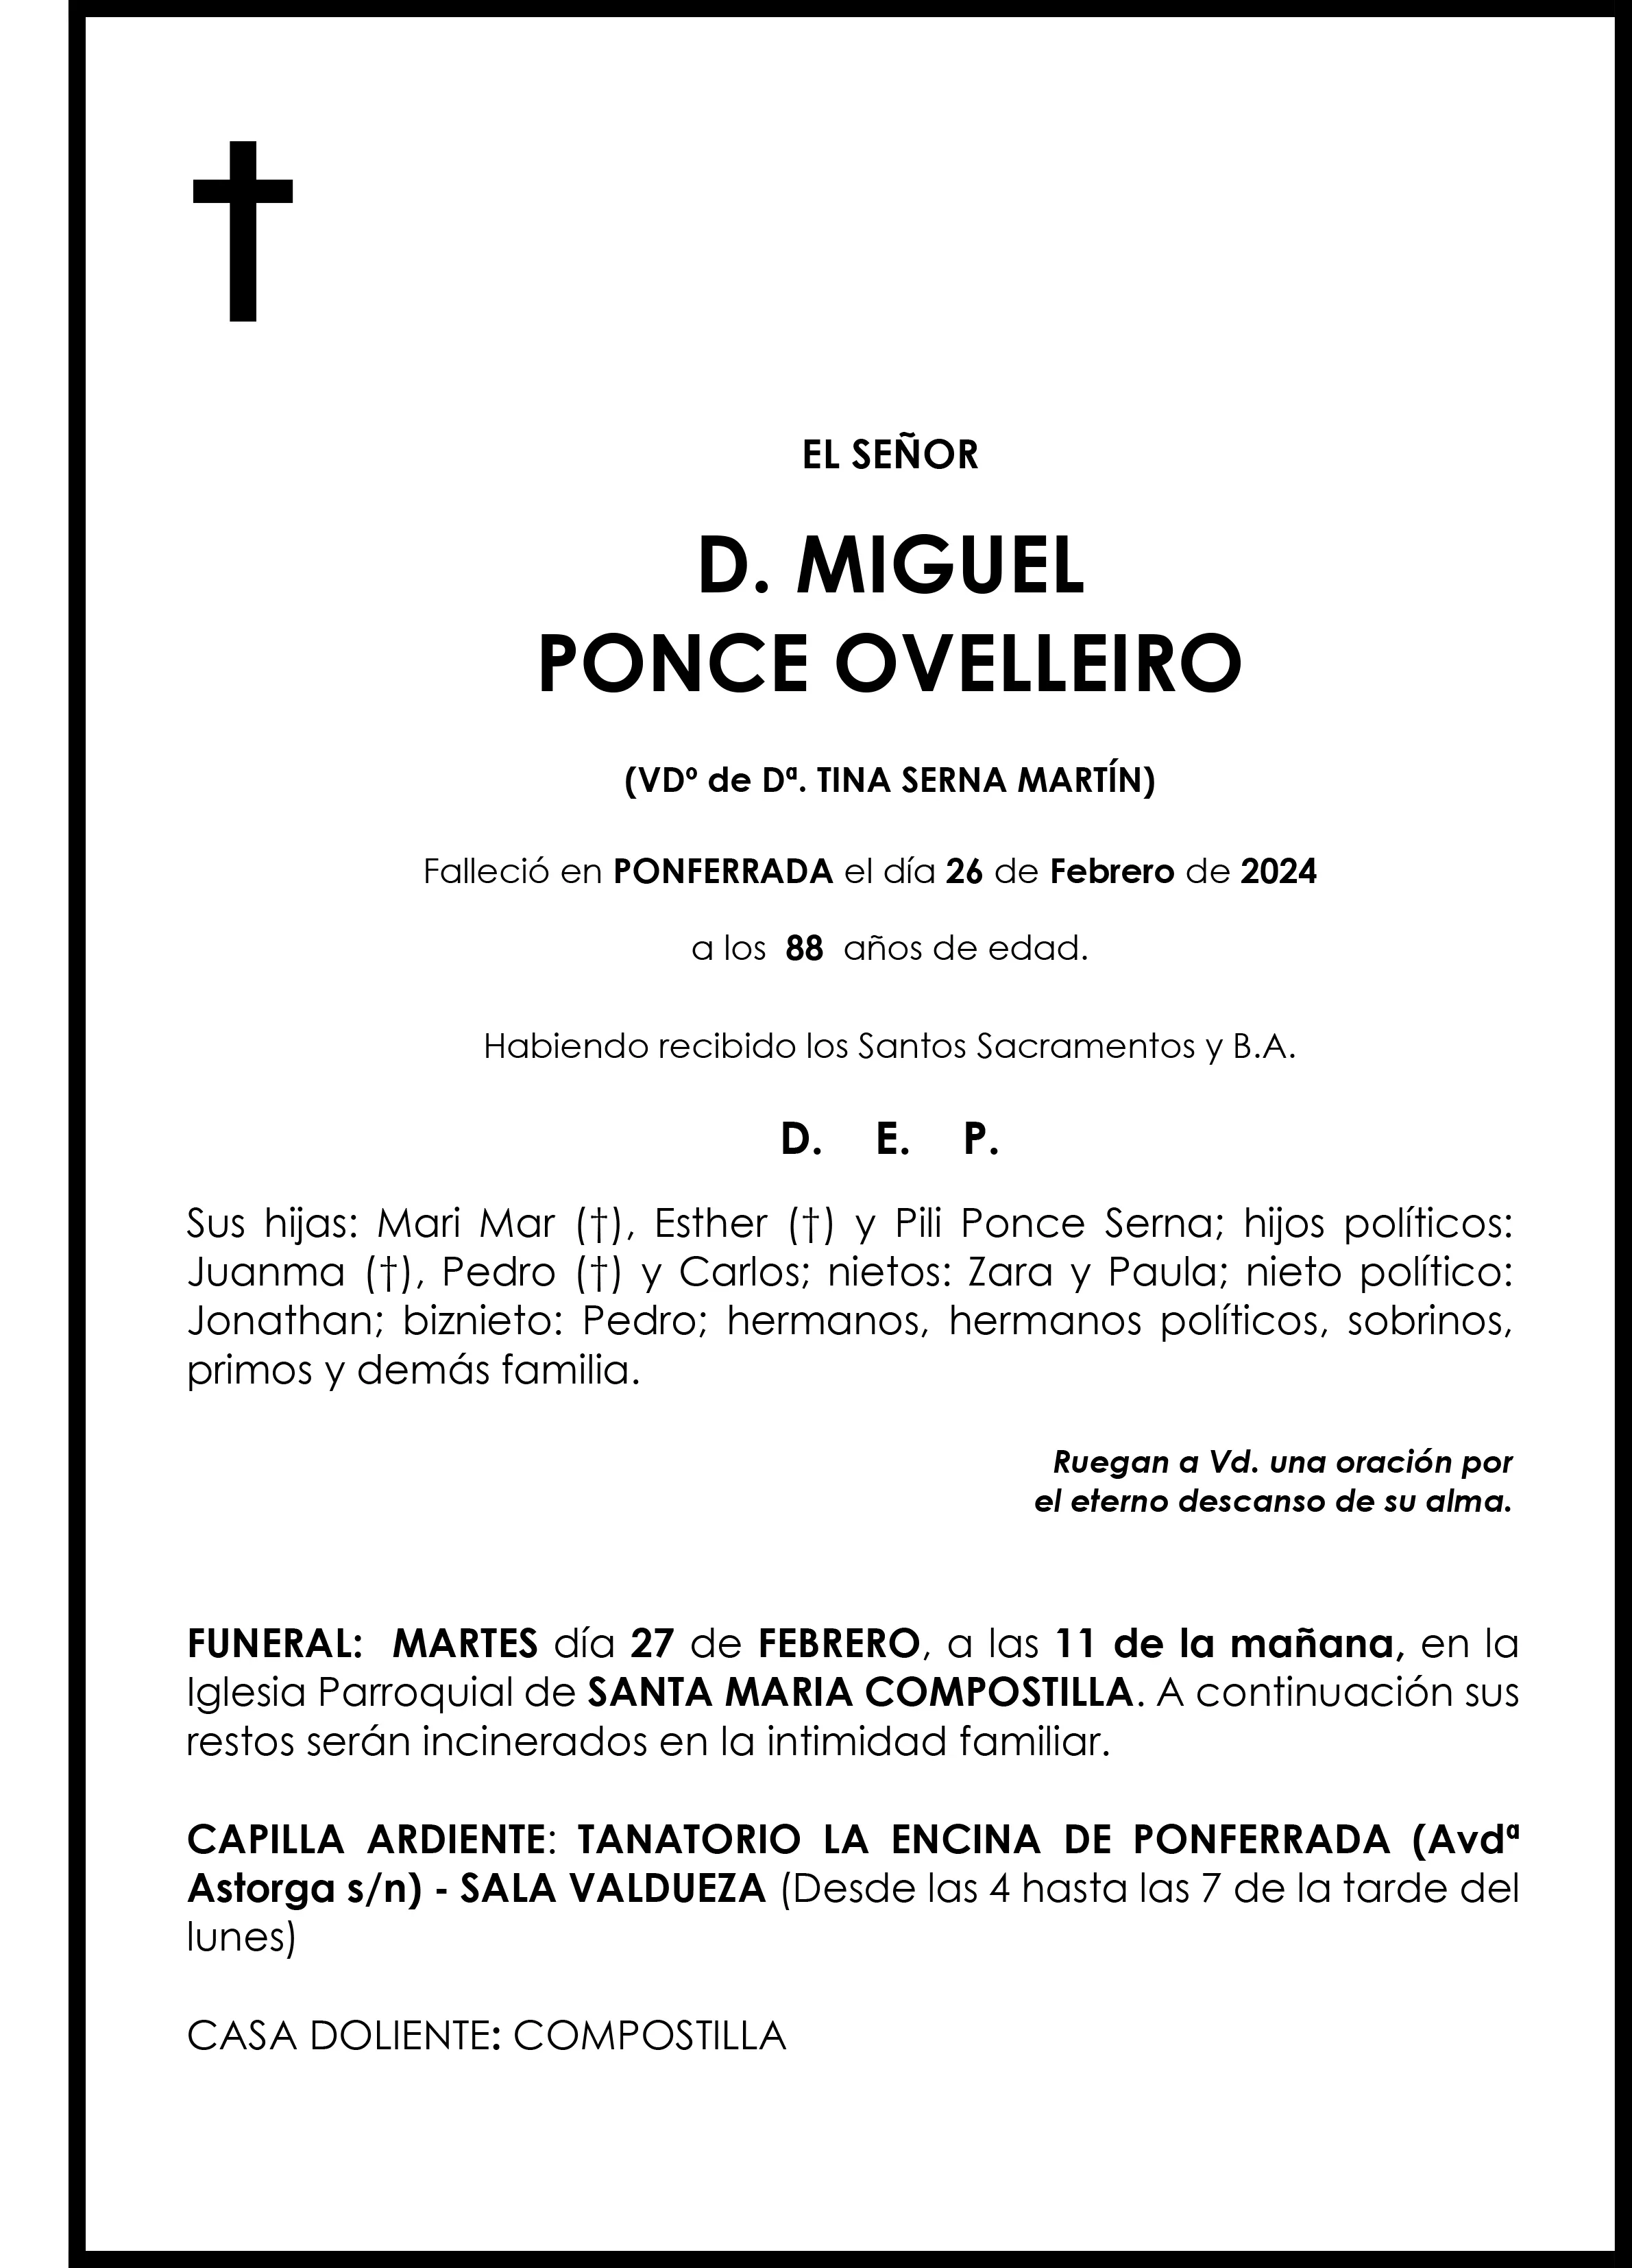 MIGUEL PONCE OVELLEIRO